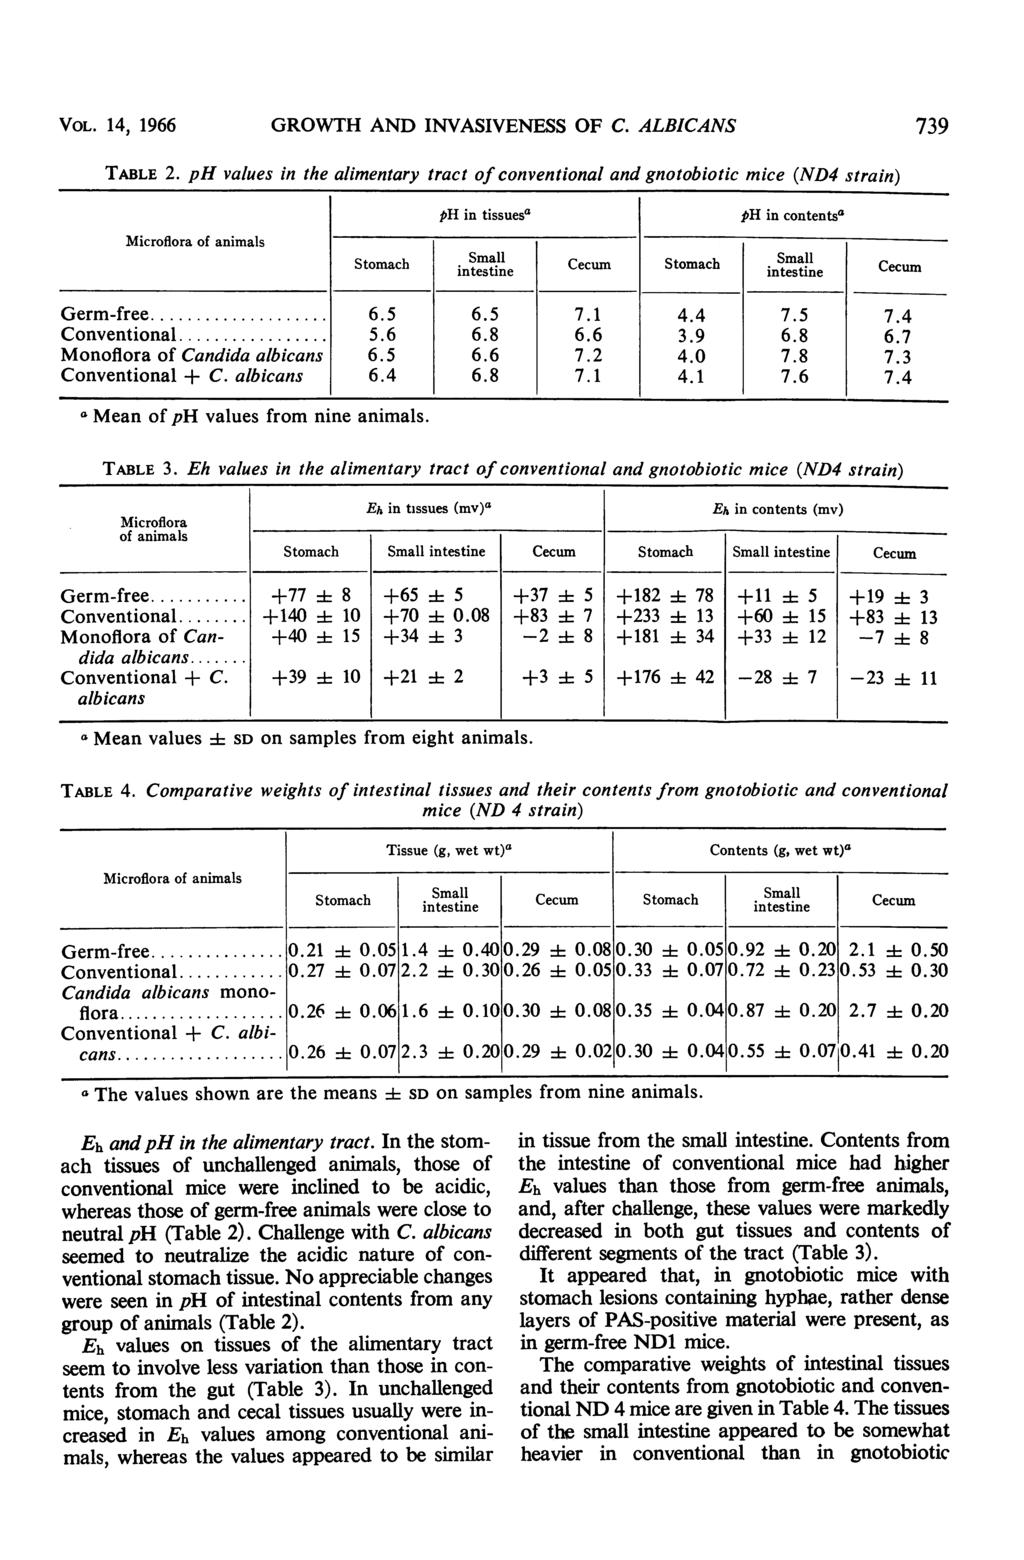 VOL. 14, 1966 GROWTH AND INVASIVENESS OF C. ALBICANS 739 TABLE 2.